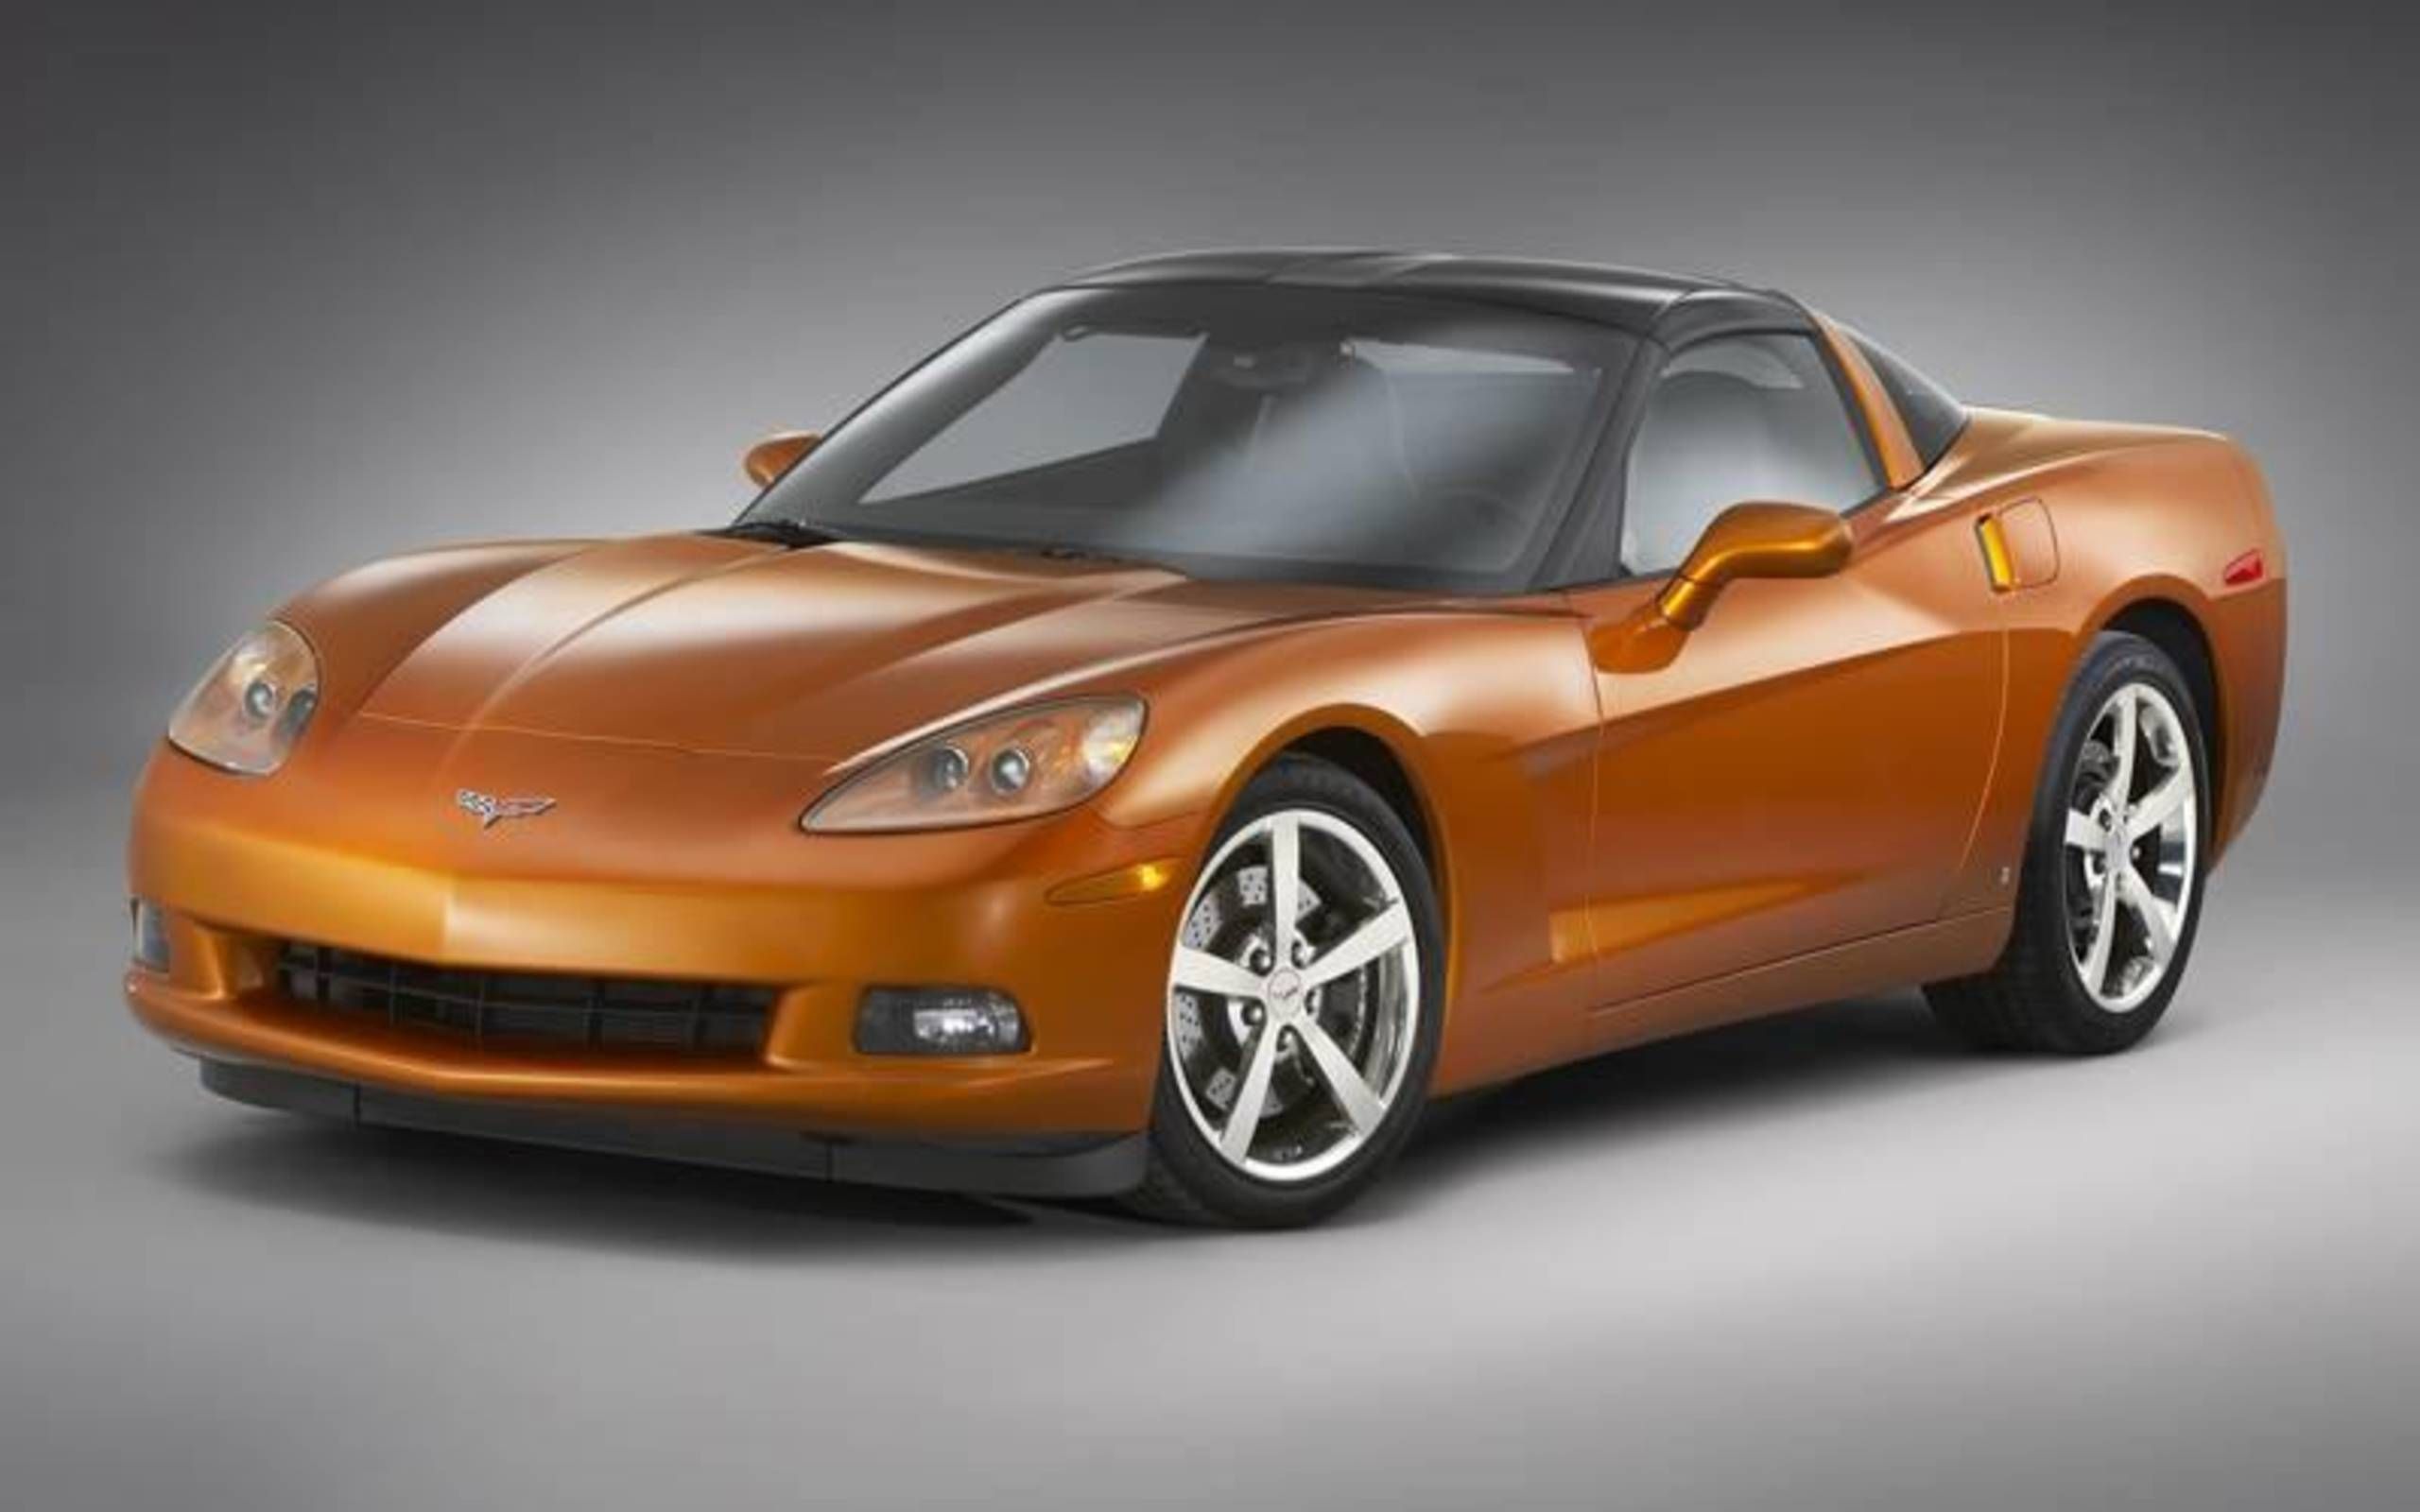 2008 Chevrolet Corvette: Faster, more luxurious and probably more expensive